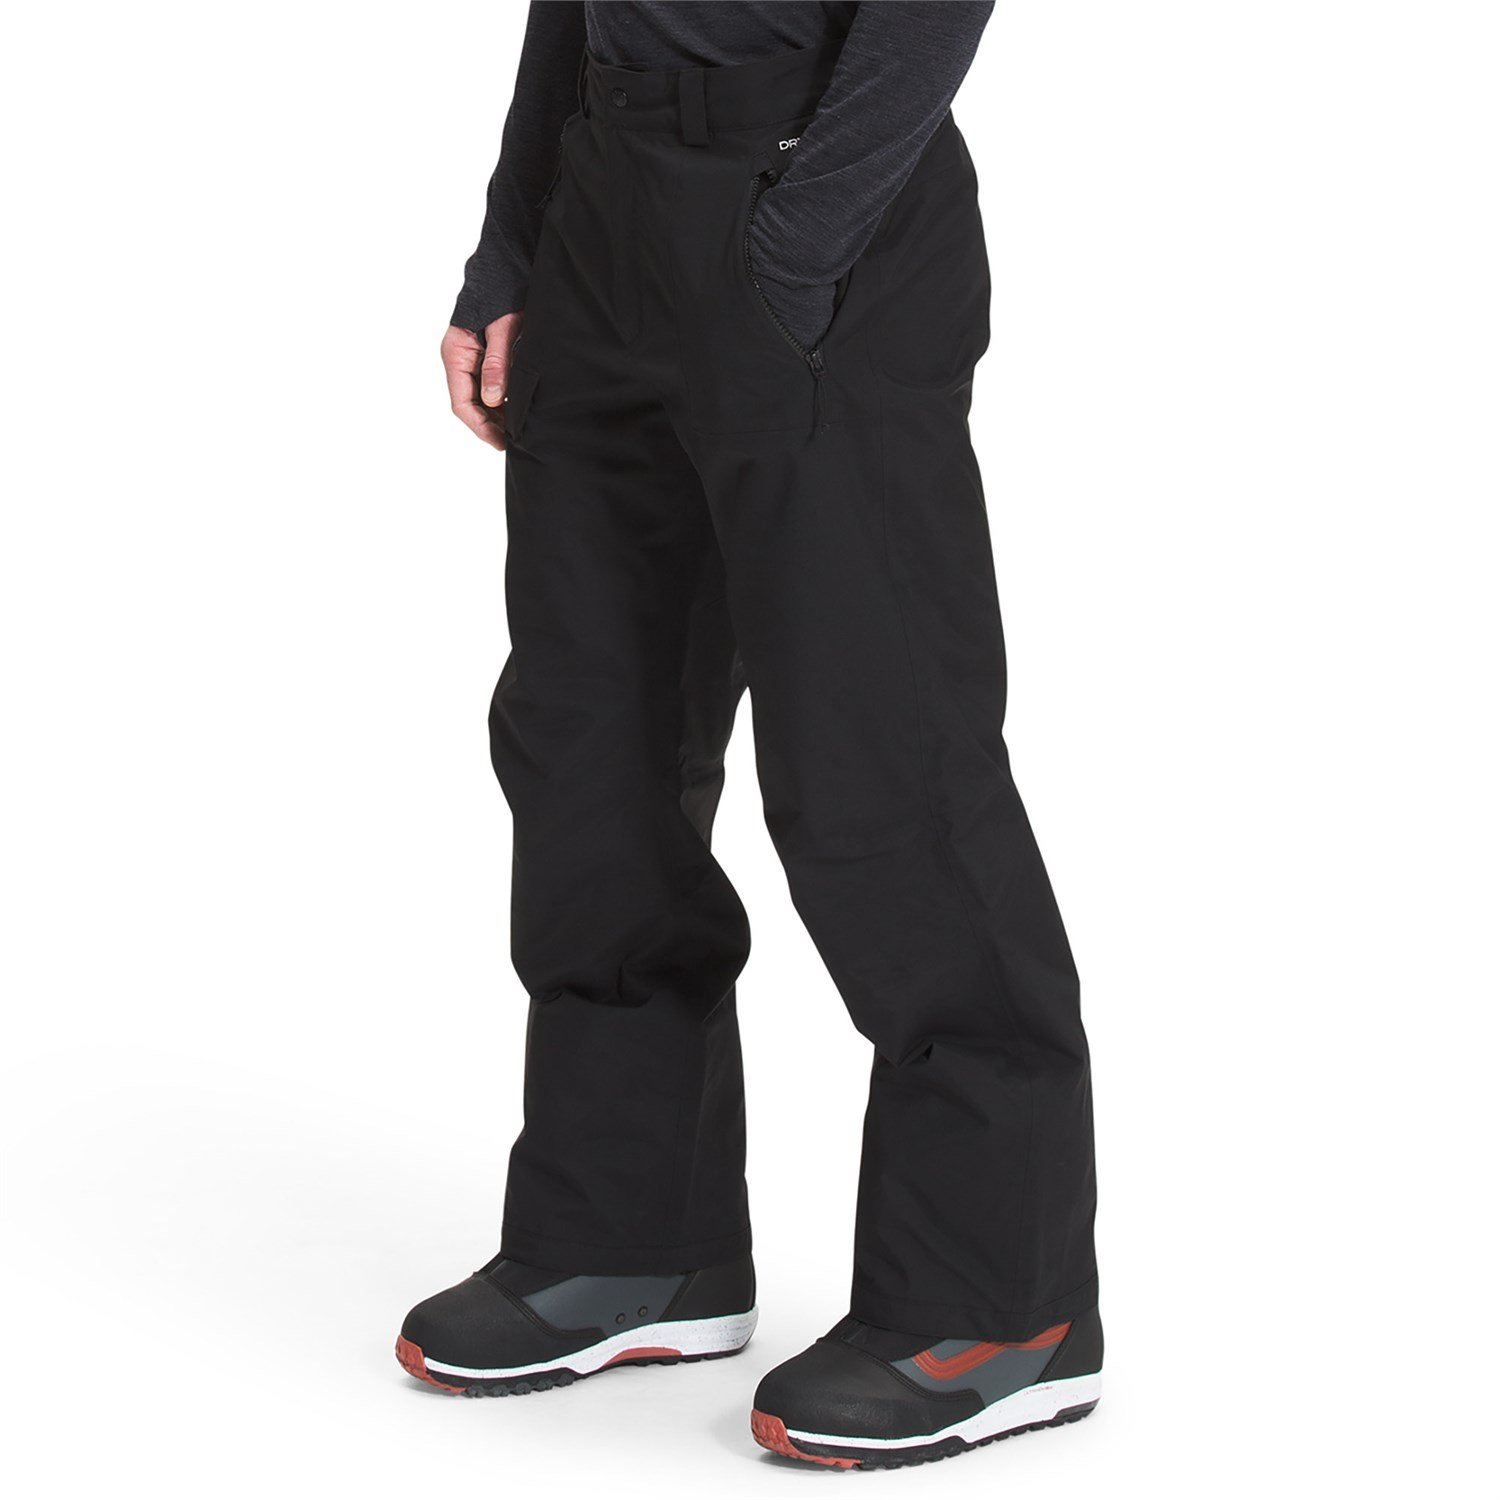 THE NORTH FACE Men's Seymore Pant